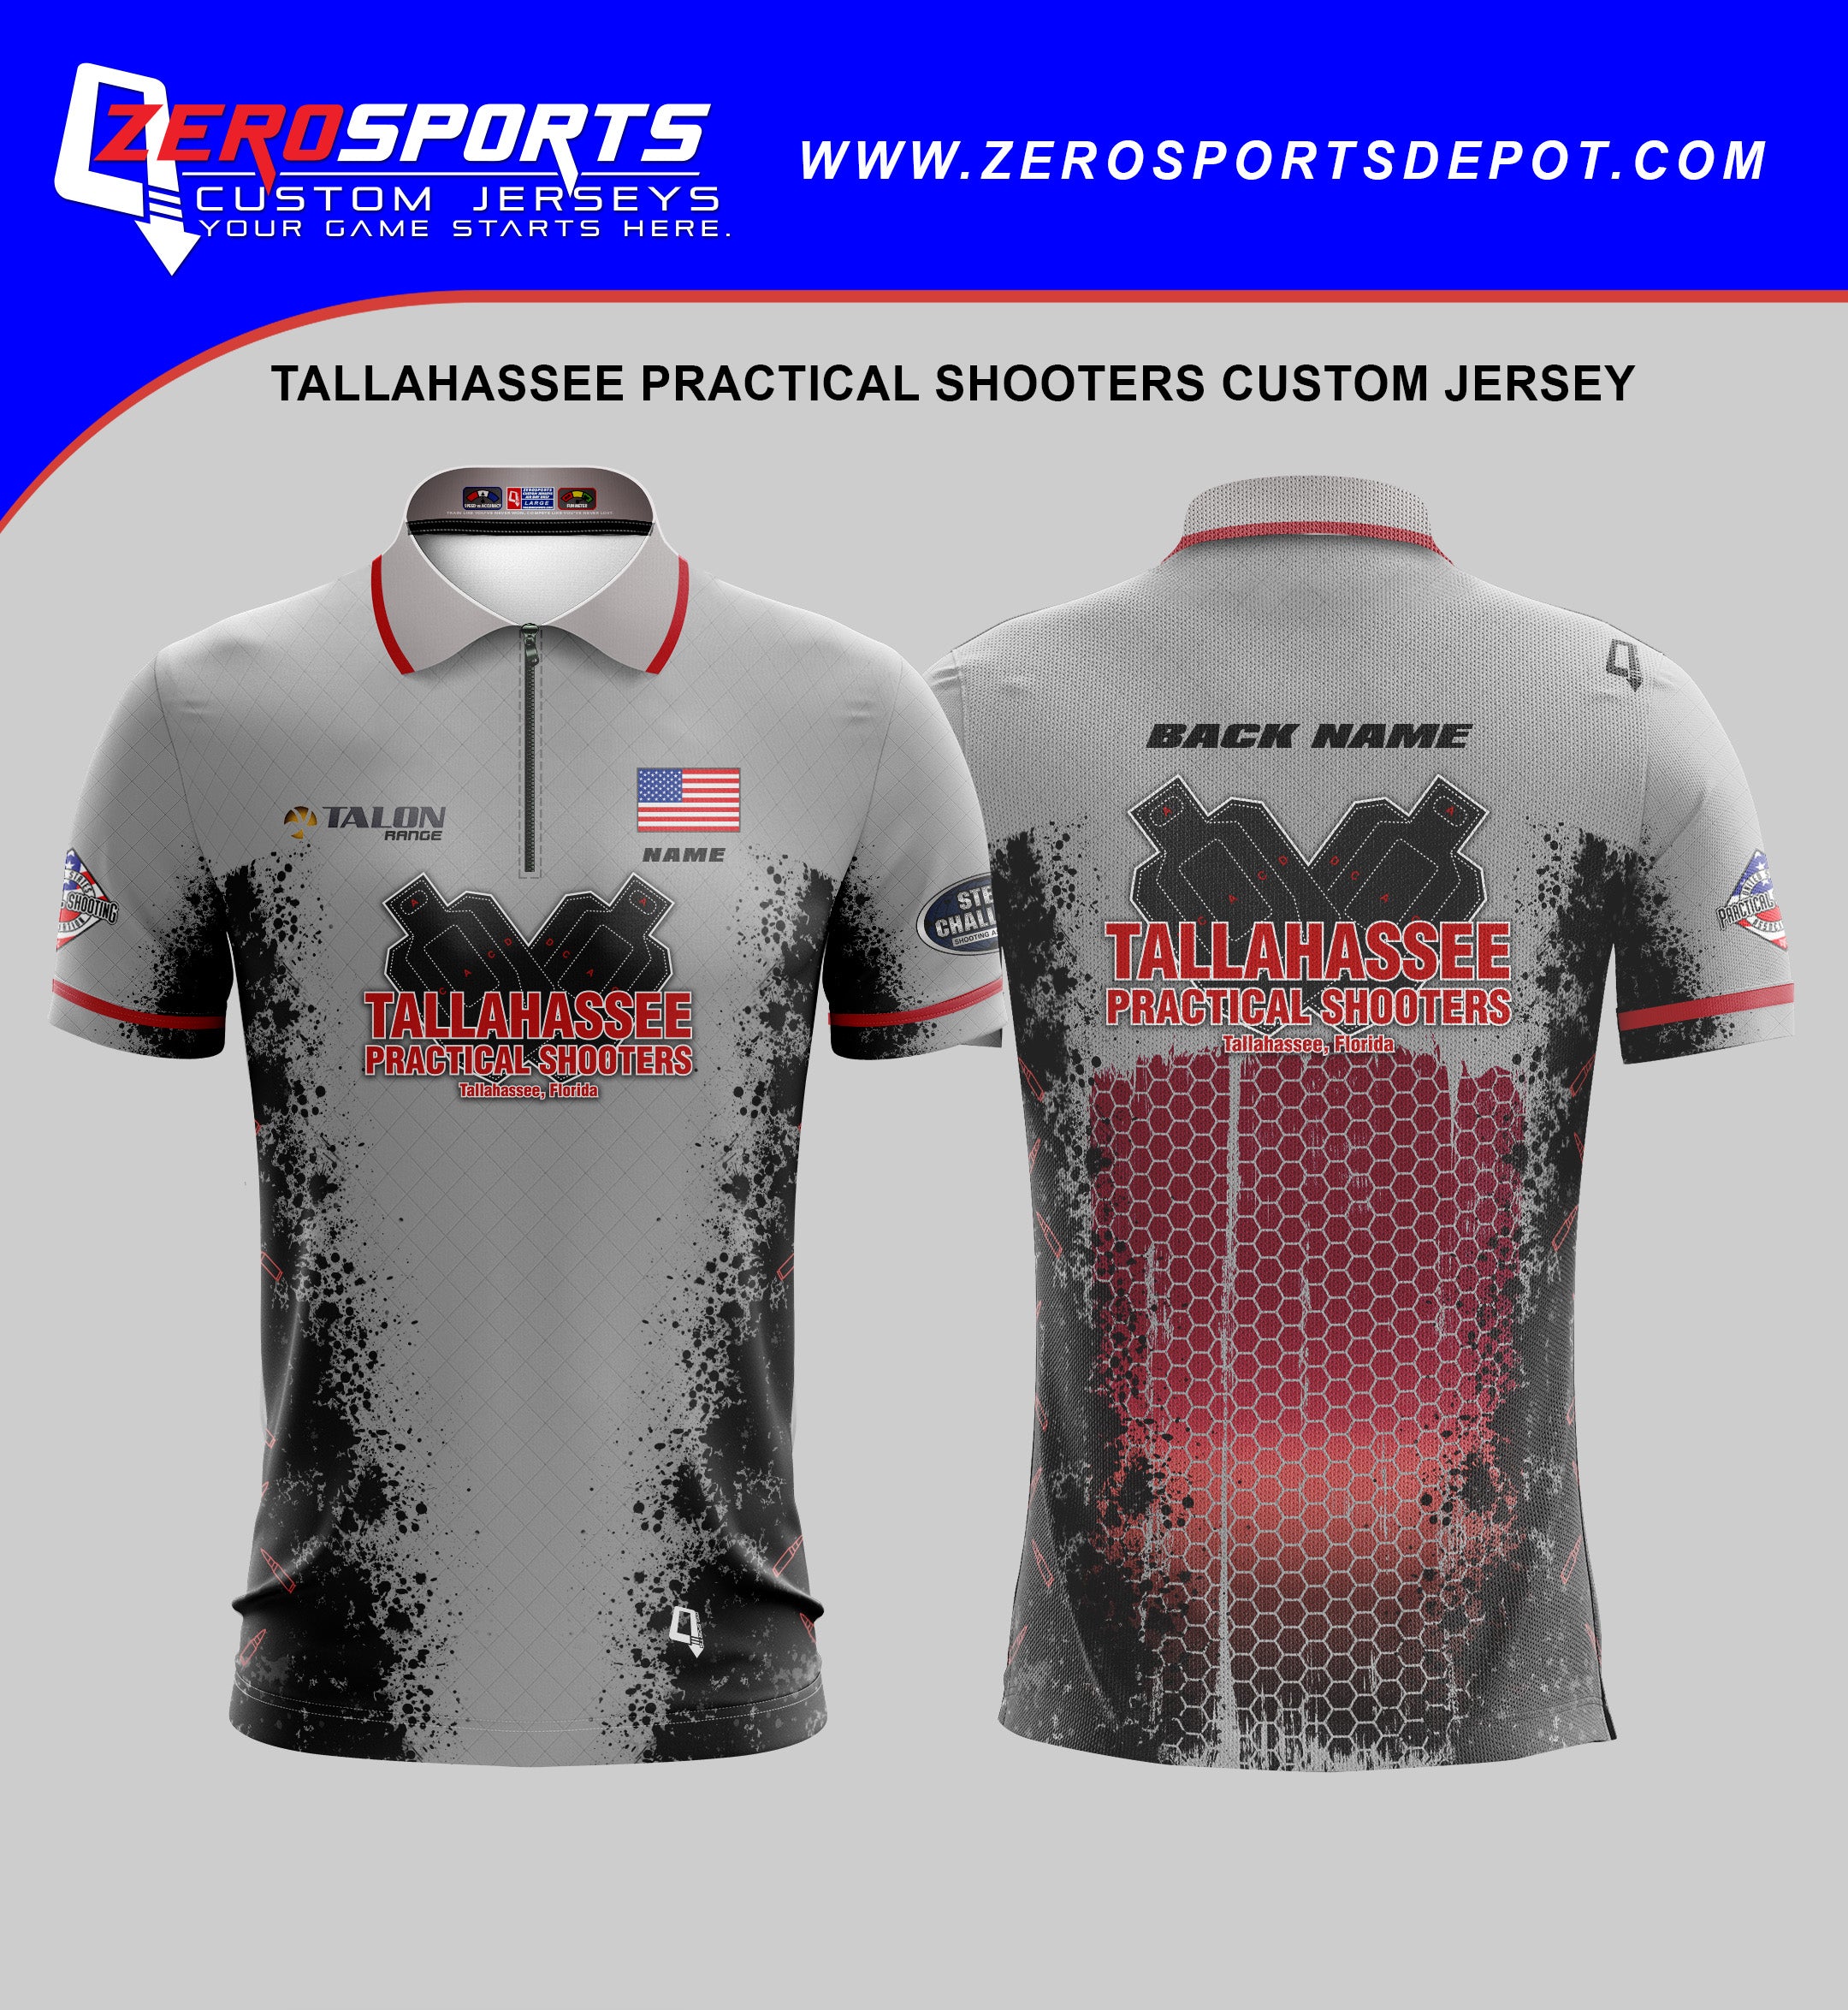 Tallahassee Practical Shooters Club Jersey